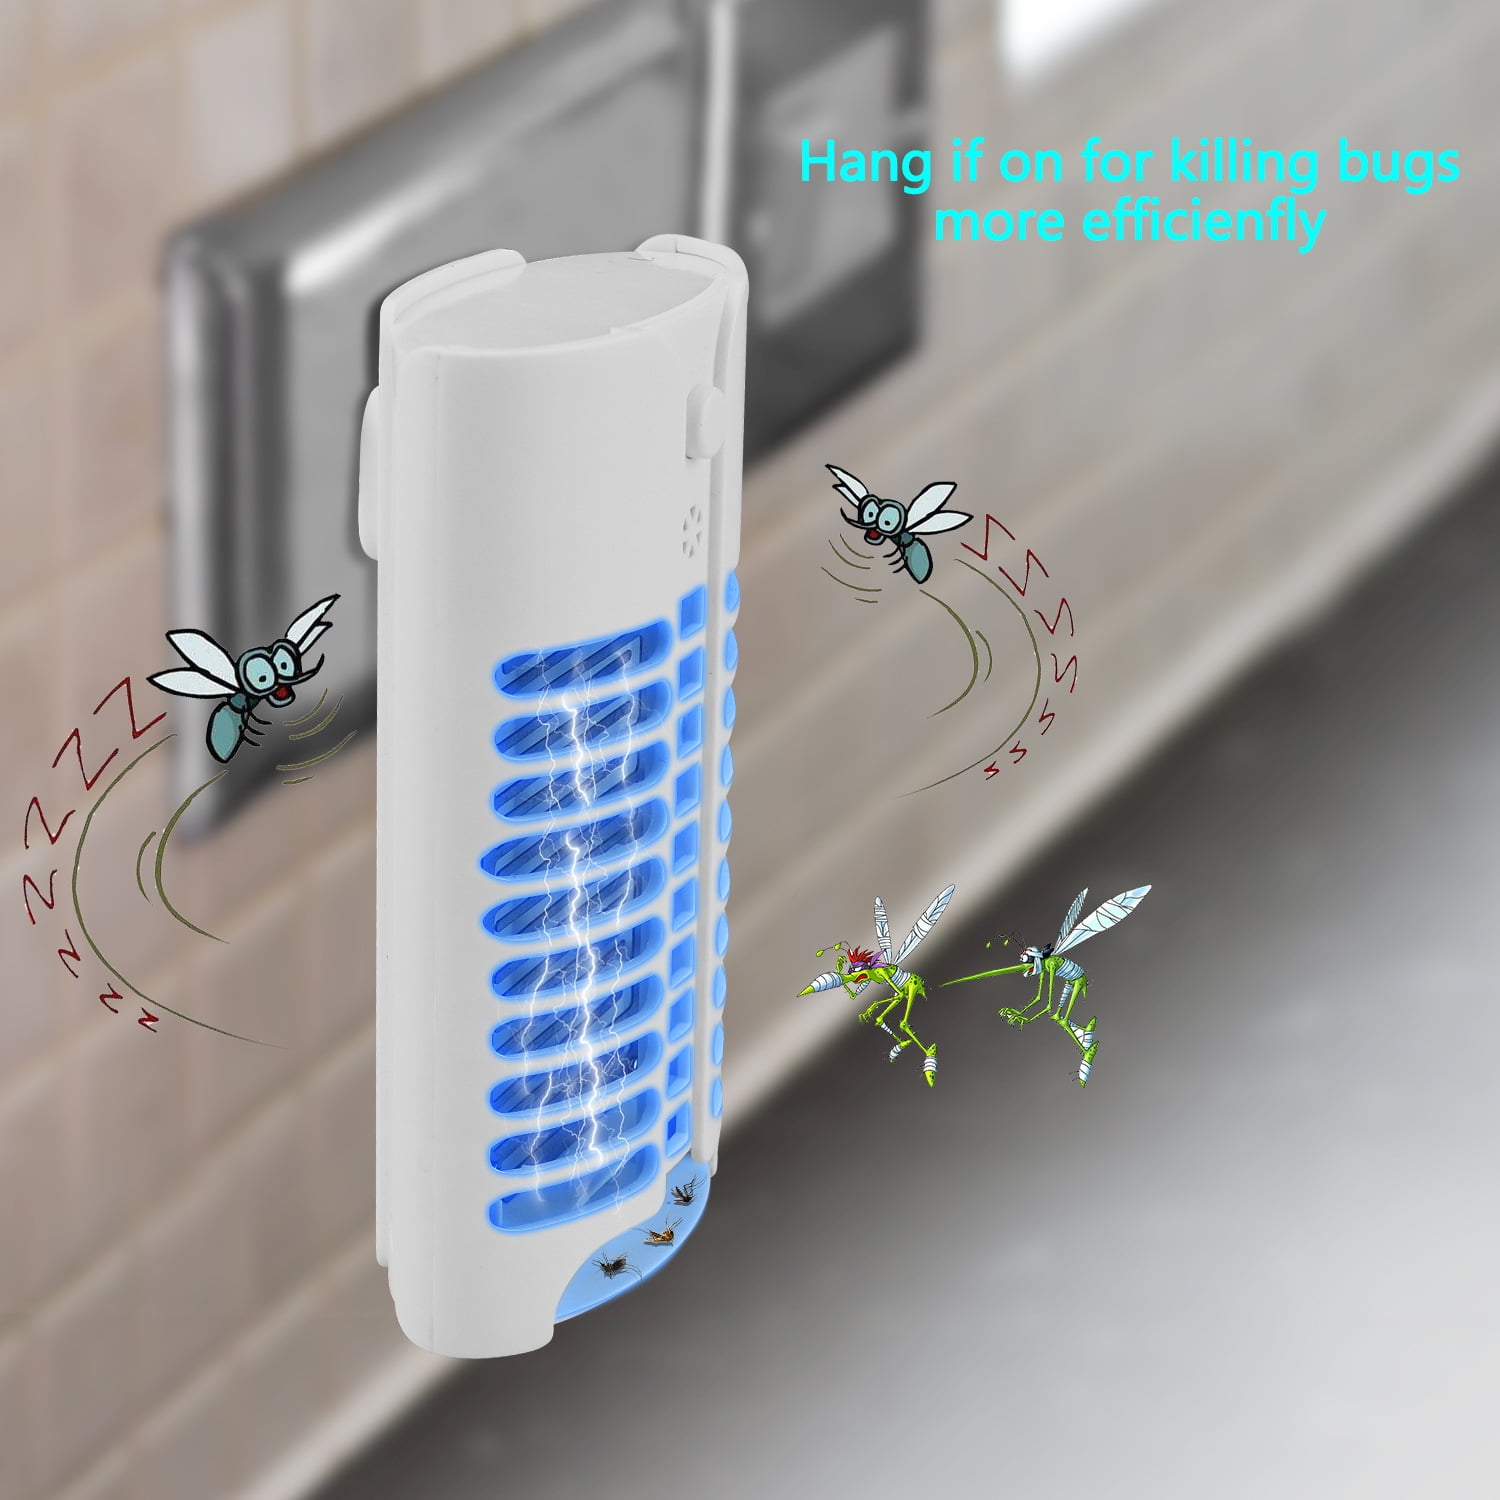 NEW ELECTRONIC UV BUG KILLER ELECTRIC INDOOR PEST FLY INSECT CONTROL 